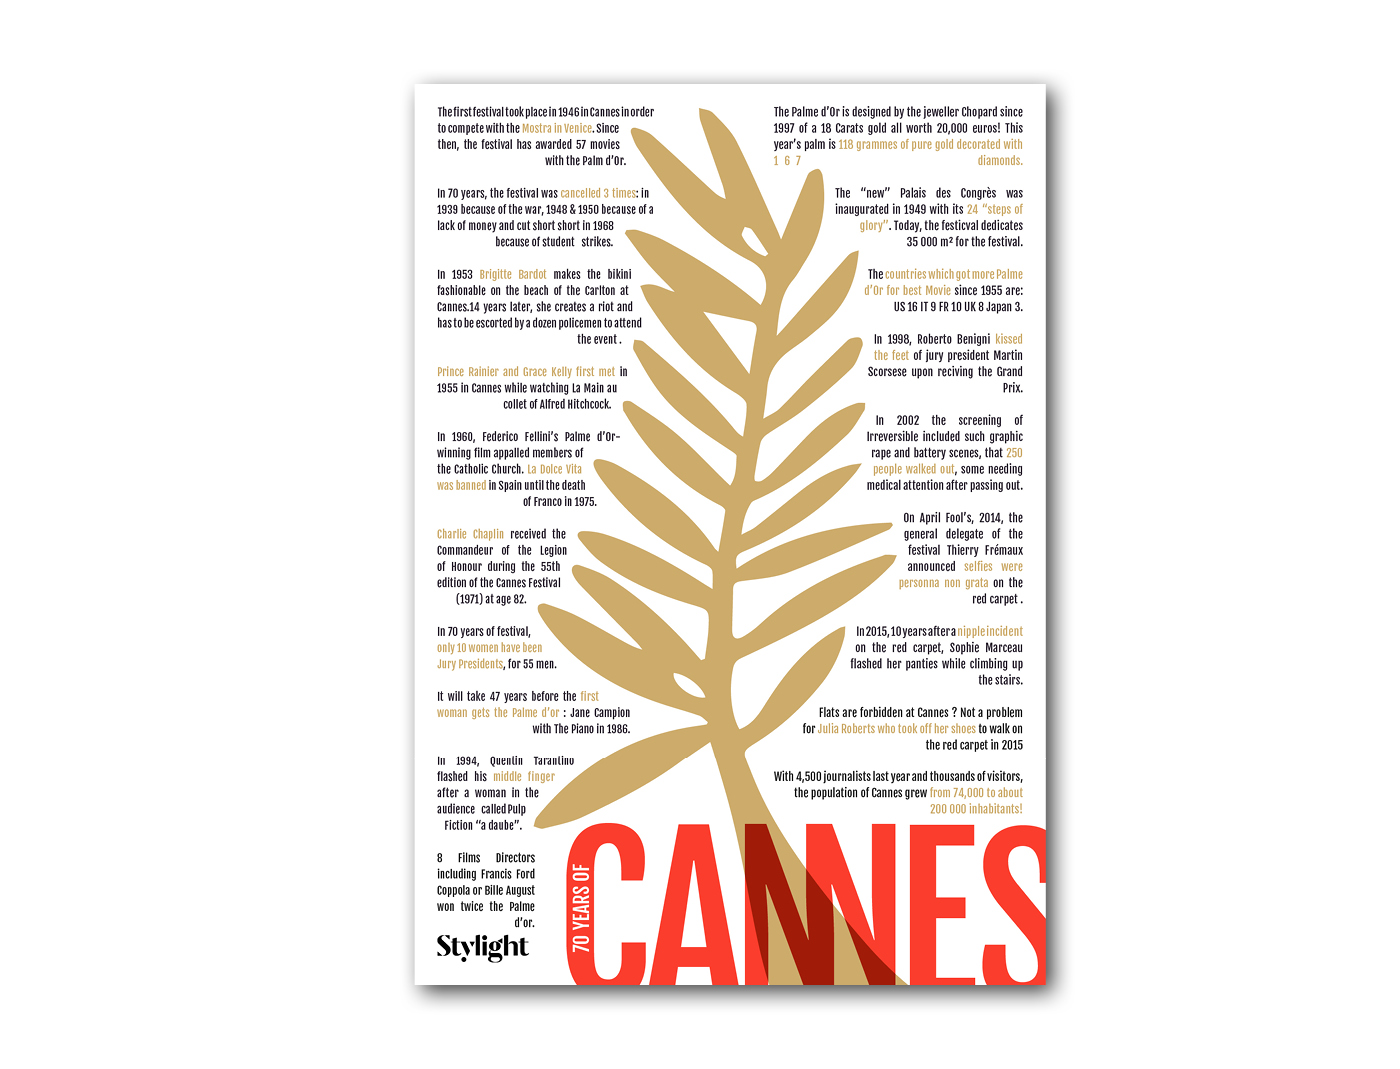 Be-Cannes_Data6